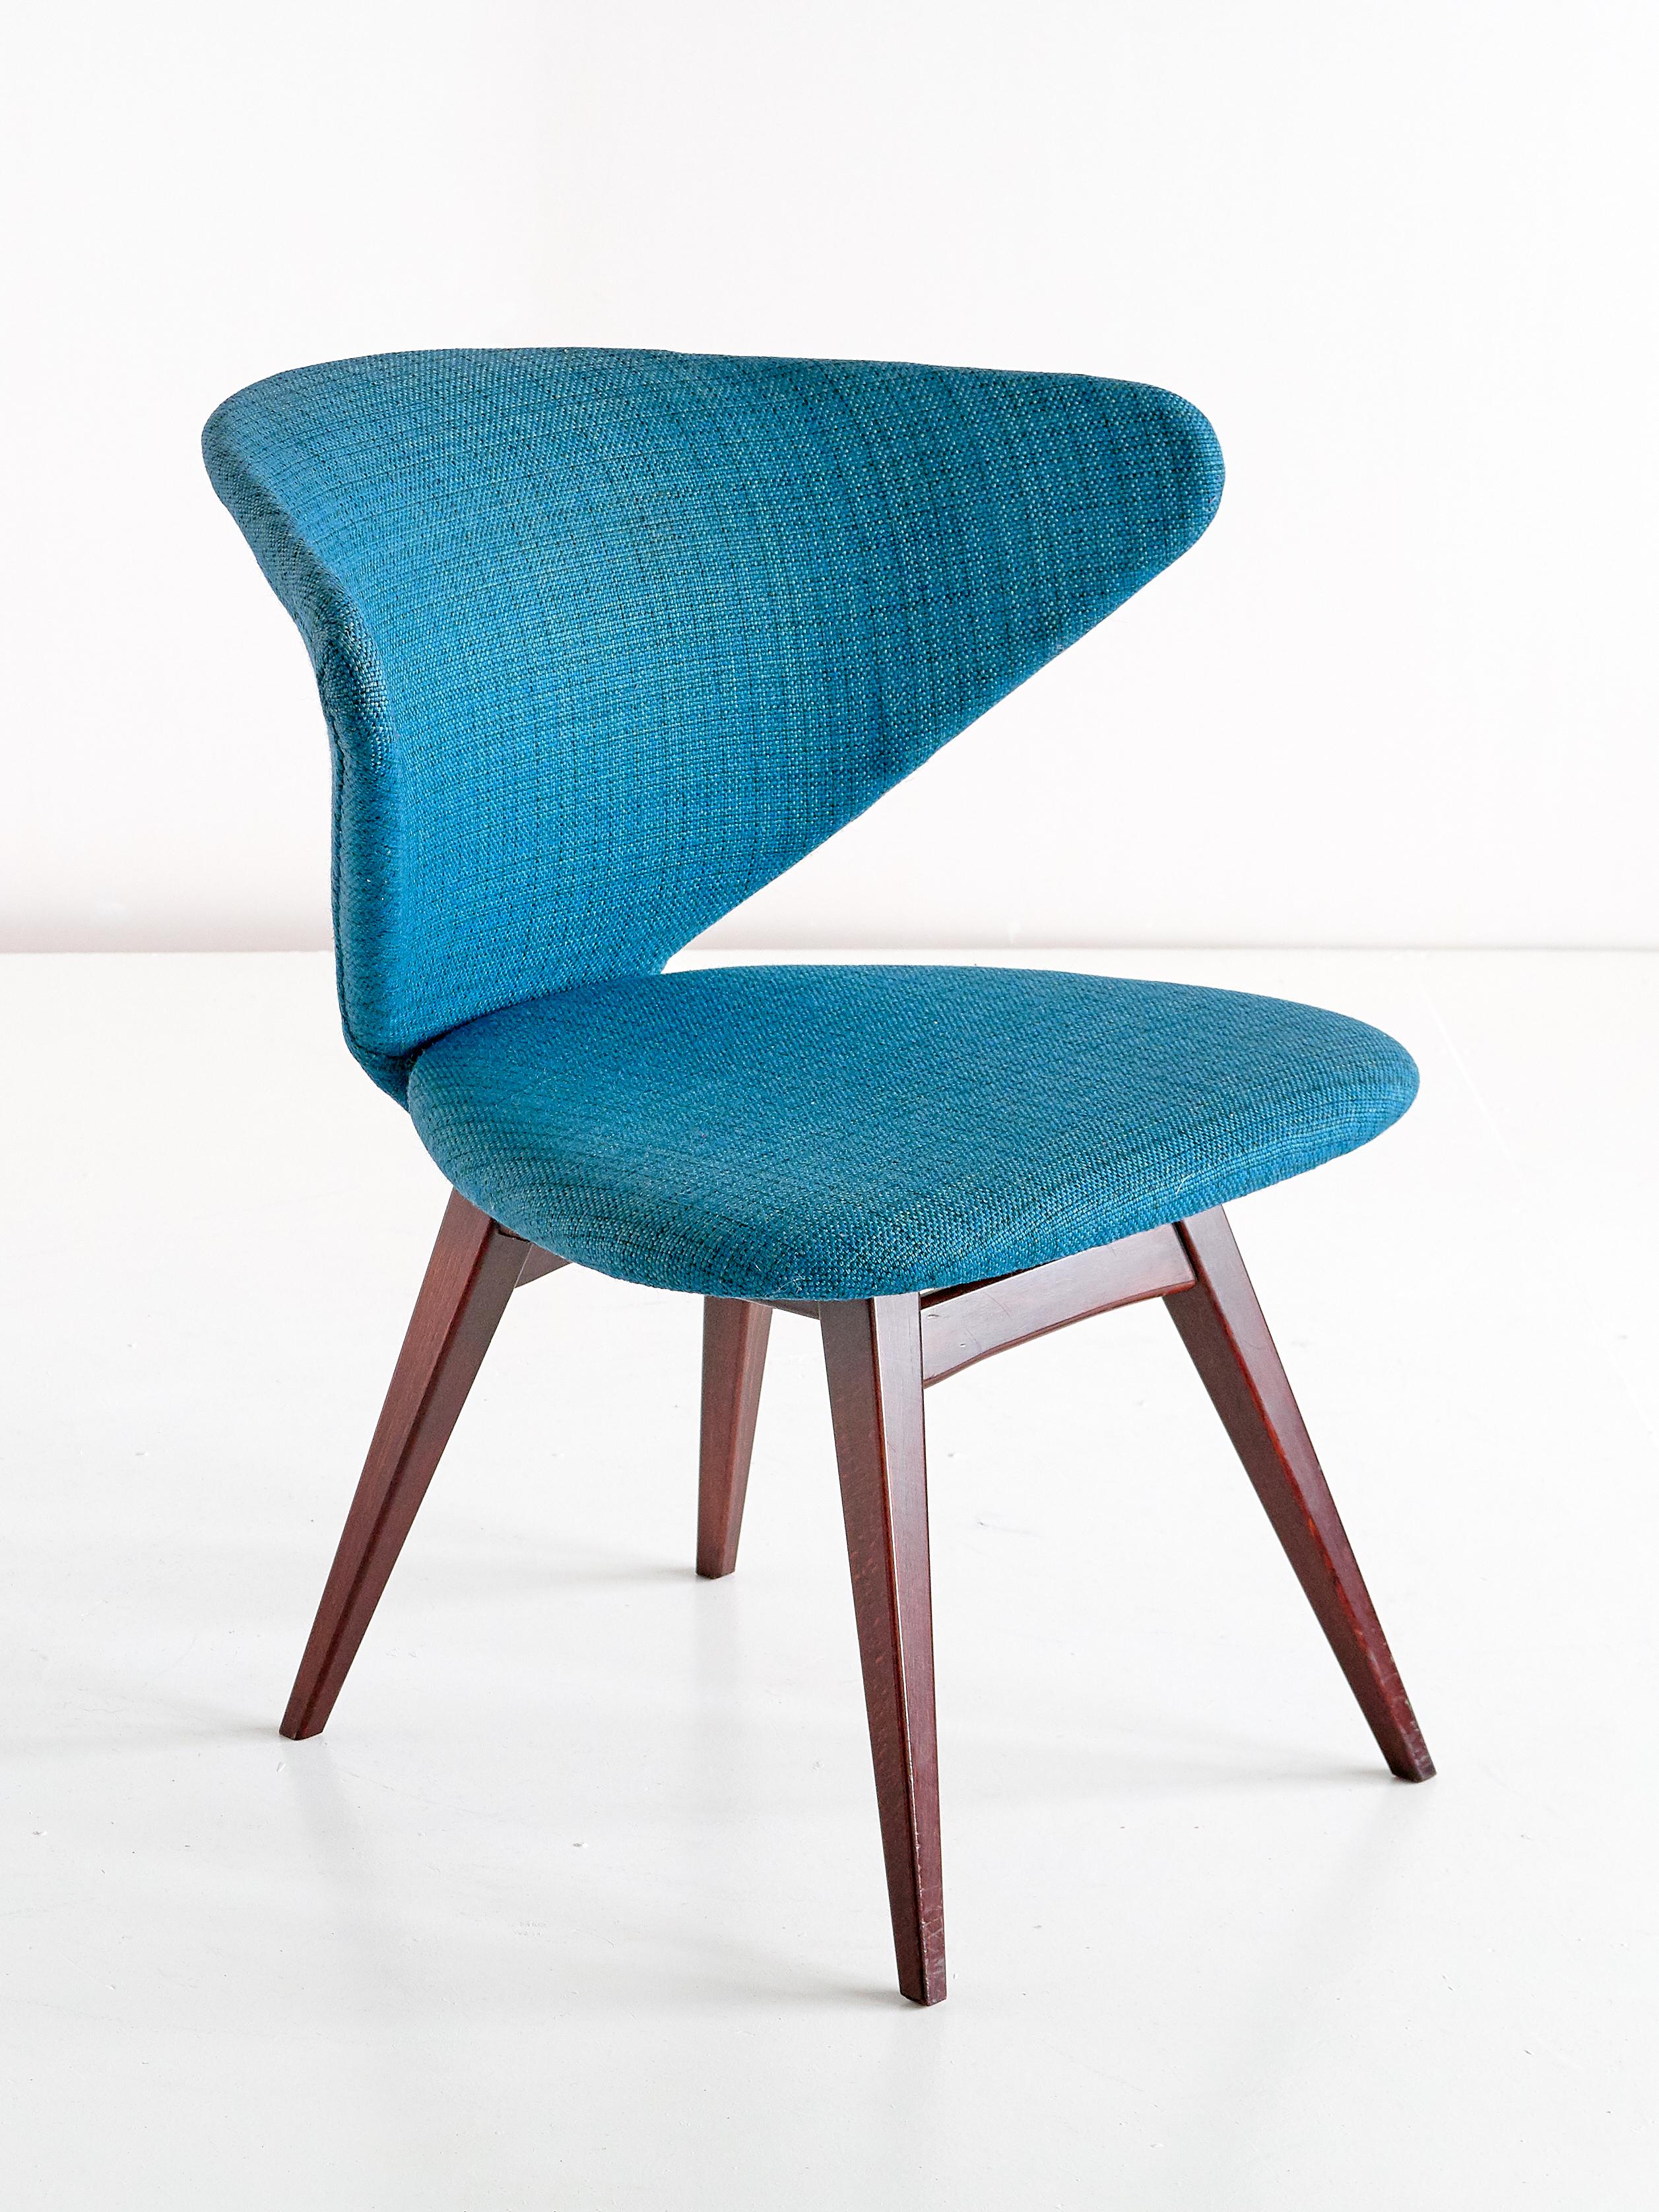 Sigfrid Ljungqvist Wing Shaped Chair, Petrol Blue Fabric and Beech, Sweden, 1958 For Sale 4